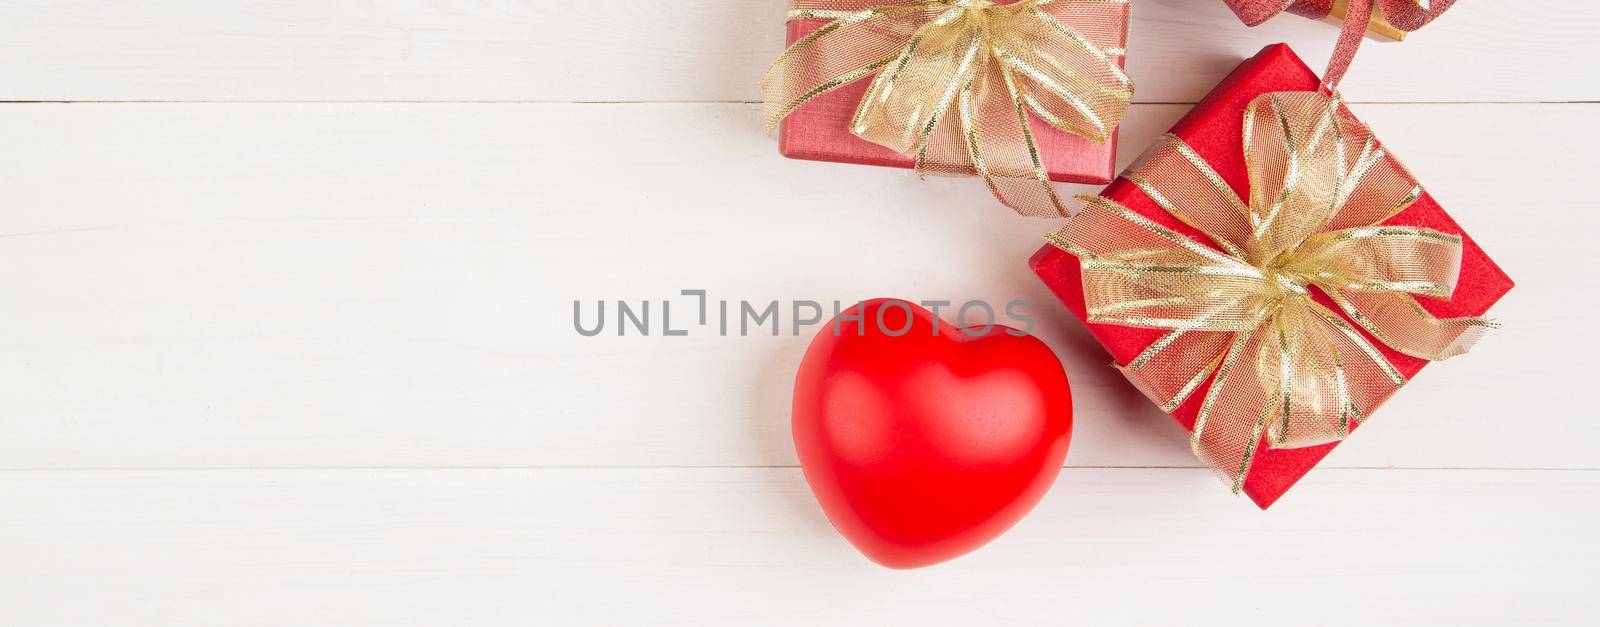 Gift box and heart shape on wooden table background, love and romance, presents in celebration and anniversary with surprise on desk, happy birthday, donate and charity, valentine day concept. by nnudoo